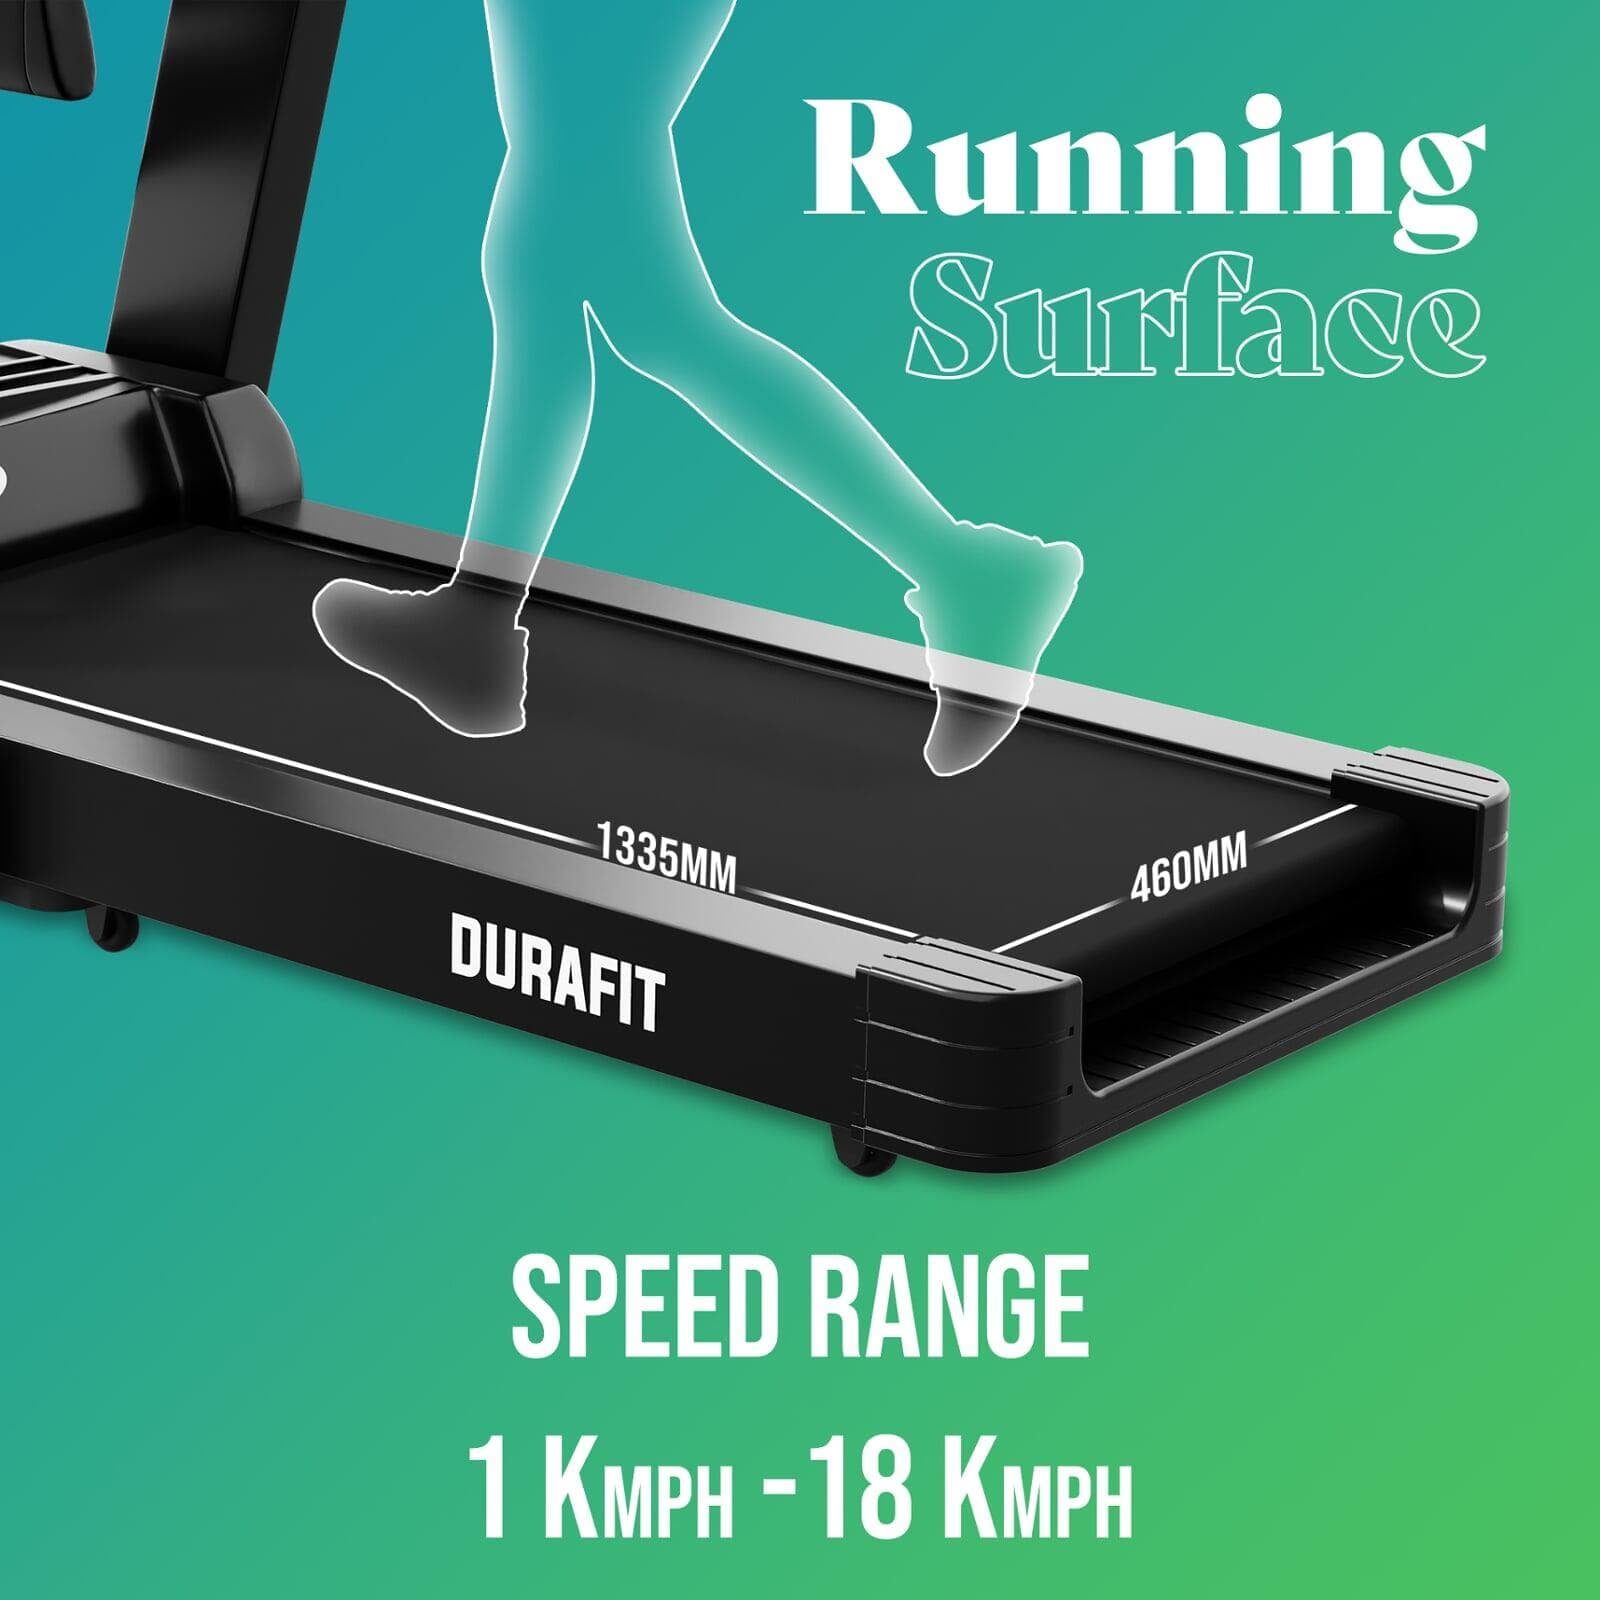 Durafit Panther Treadmill with Wide Running Surface